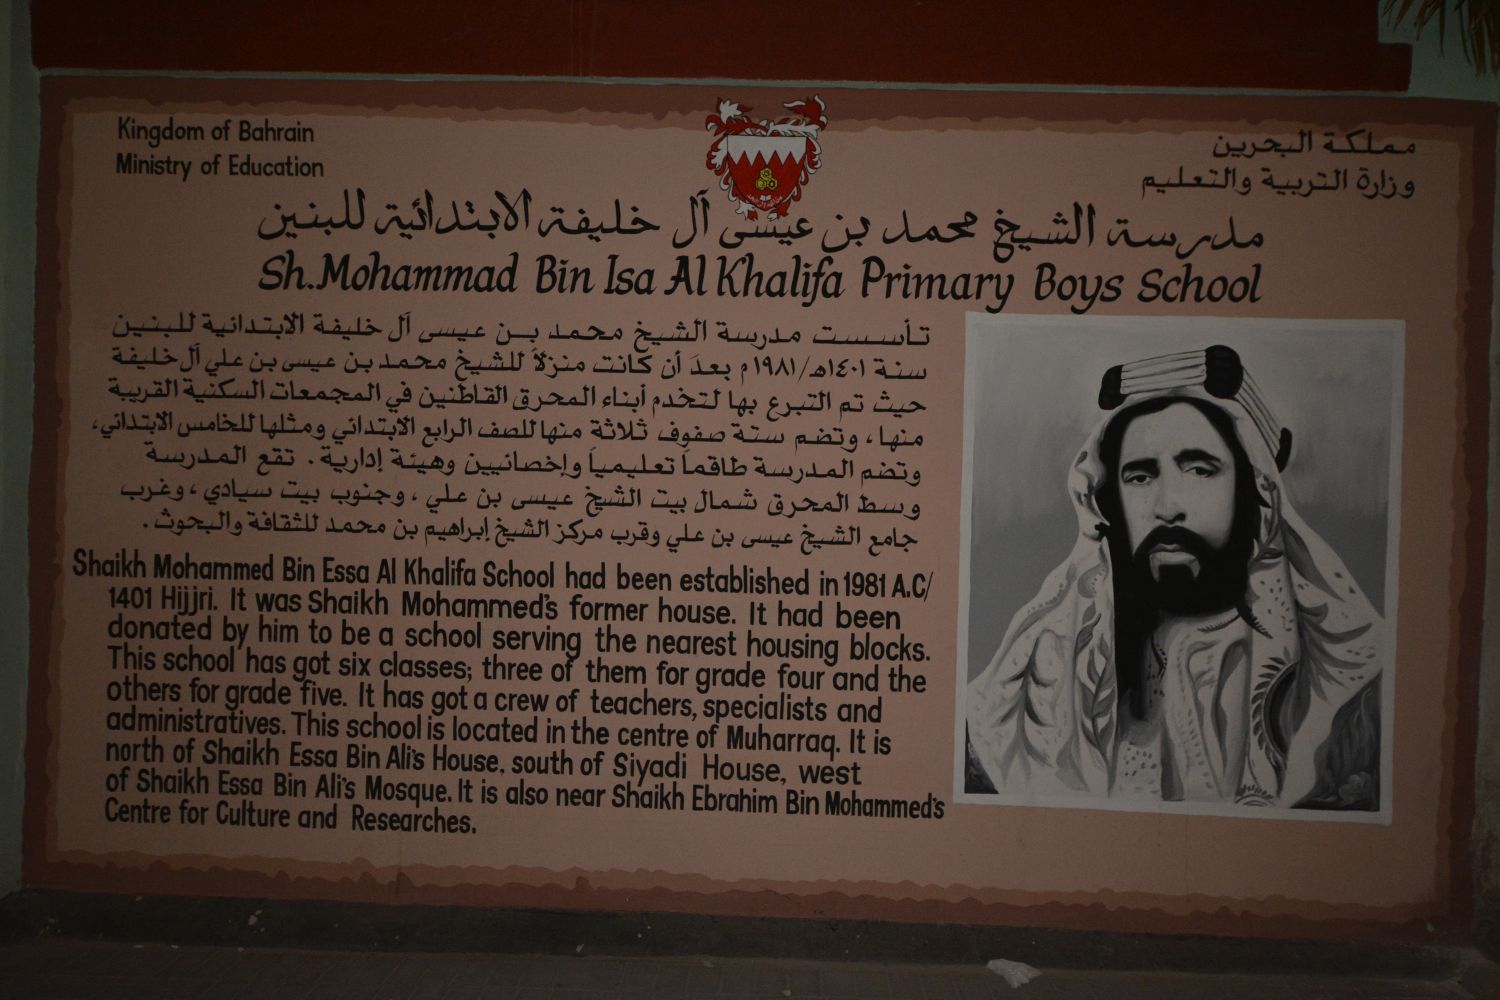 Signage from the Sh. Mohammad Bin Isa Al Khalifa Primary Boys School in Bahrain, giving a historical overview of the building's history in English and Arabic.